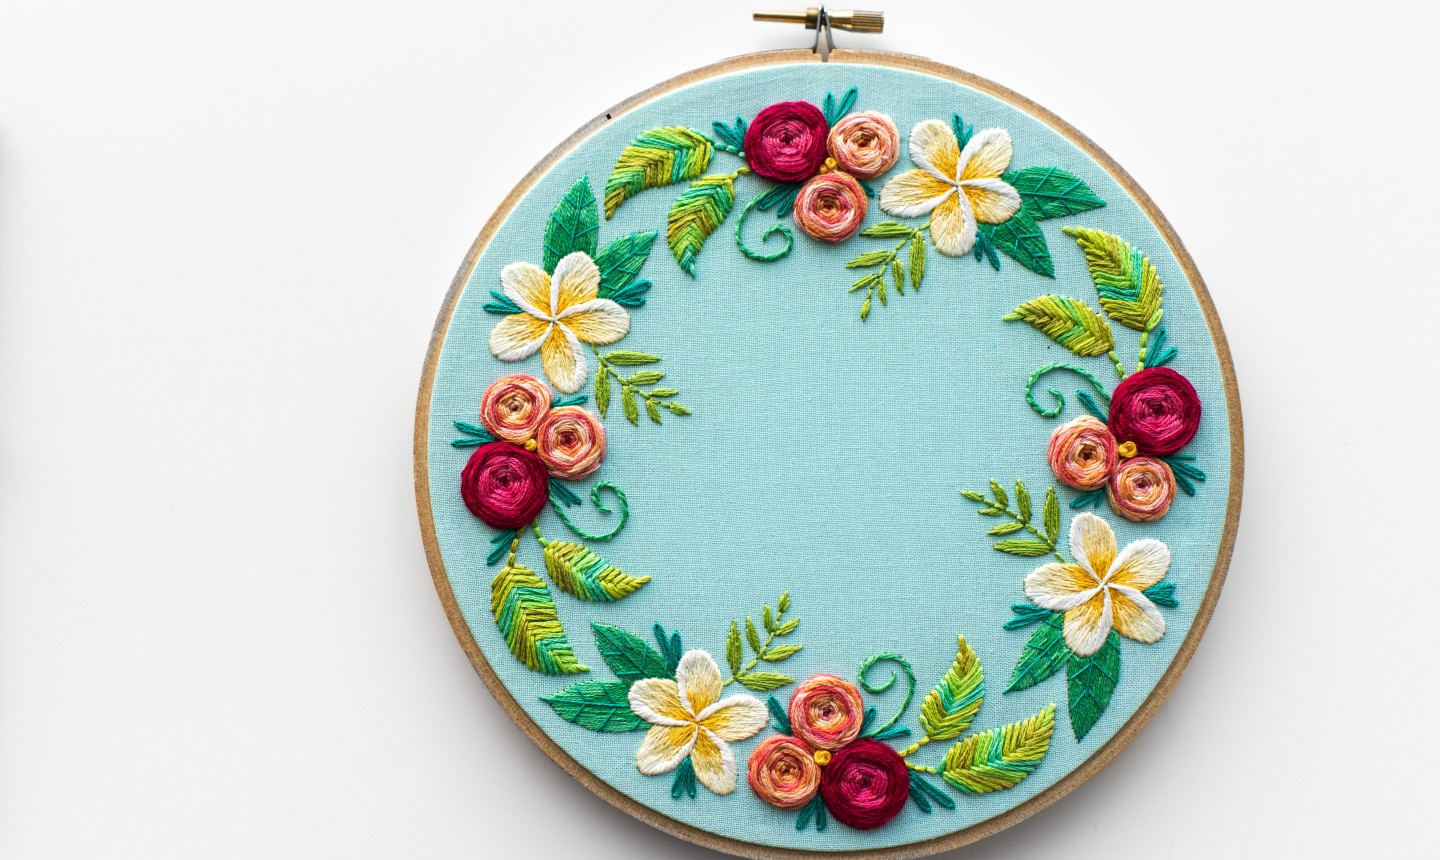 Beginner Embroidery Patterns 5 Beginner Hand Embroidery Projects